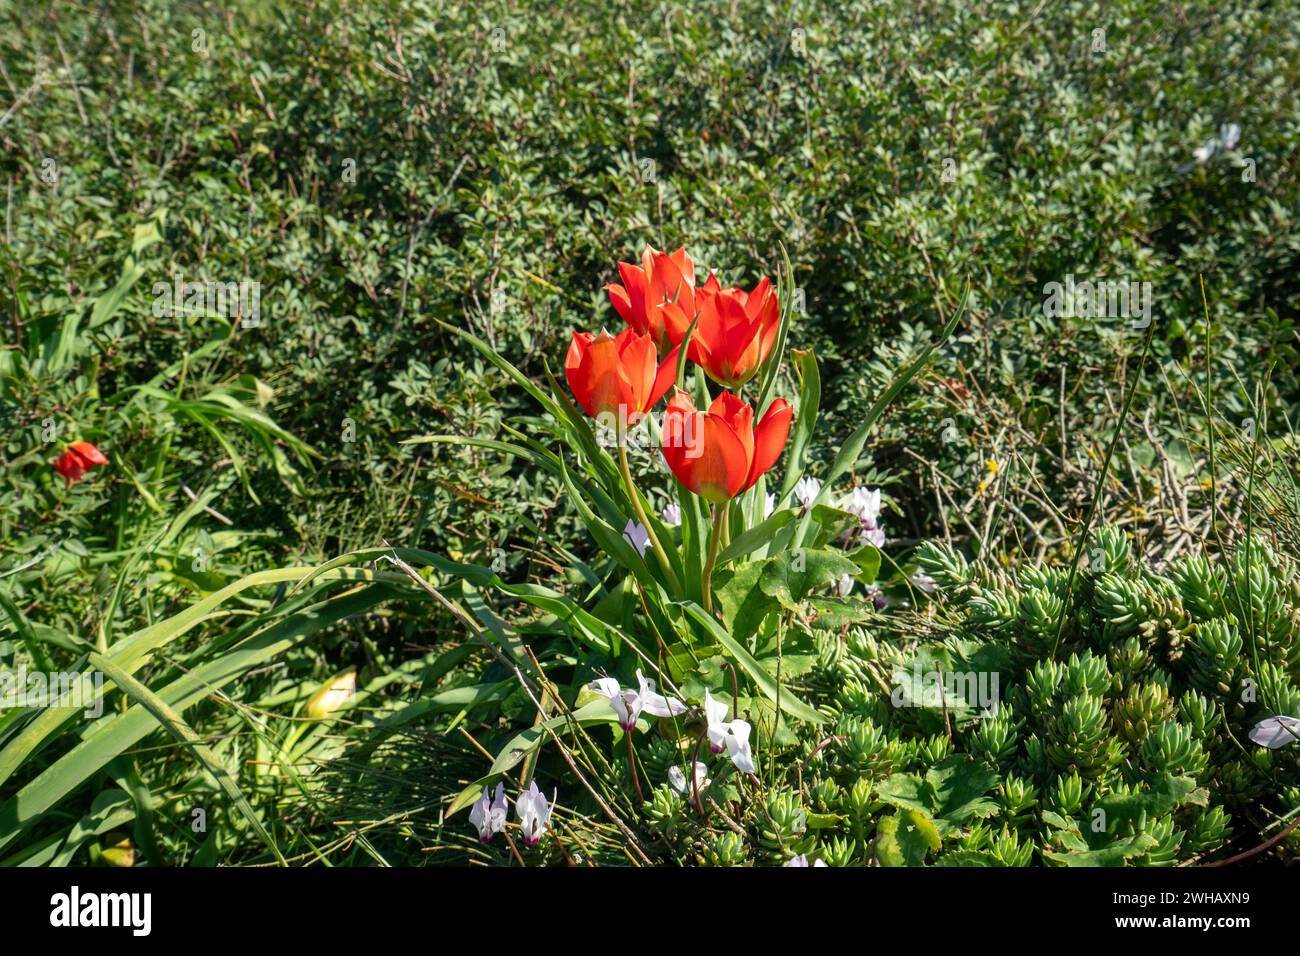 Tulipa agenensis is a bulb-forming perennial. The flowers are brick red or deep red with black and yellow markings toward the center with a green stem Stock Photo